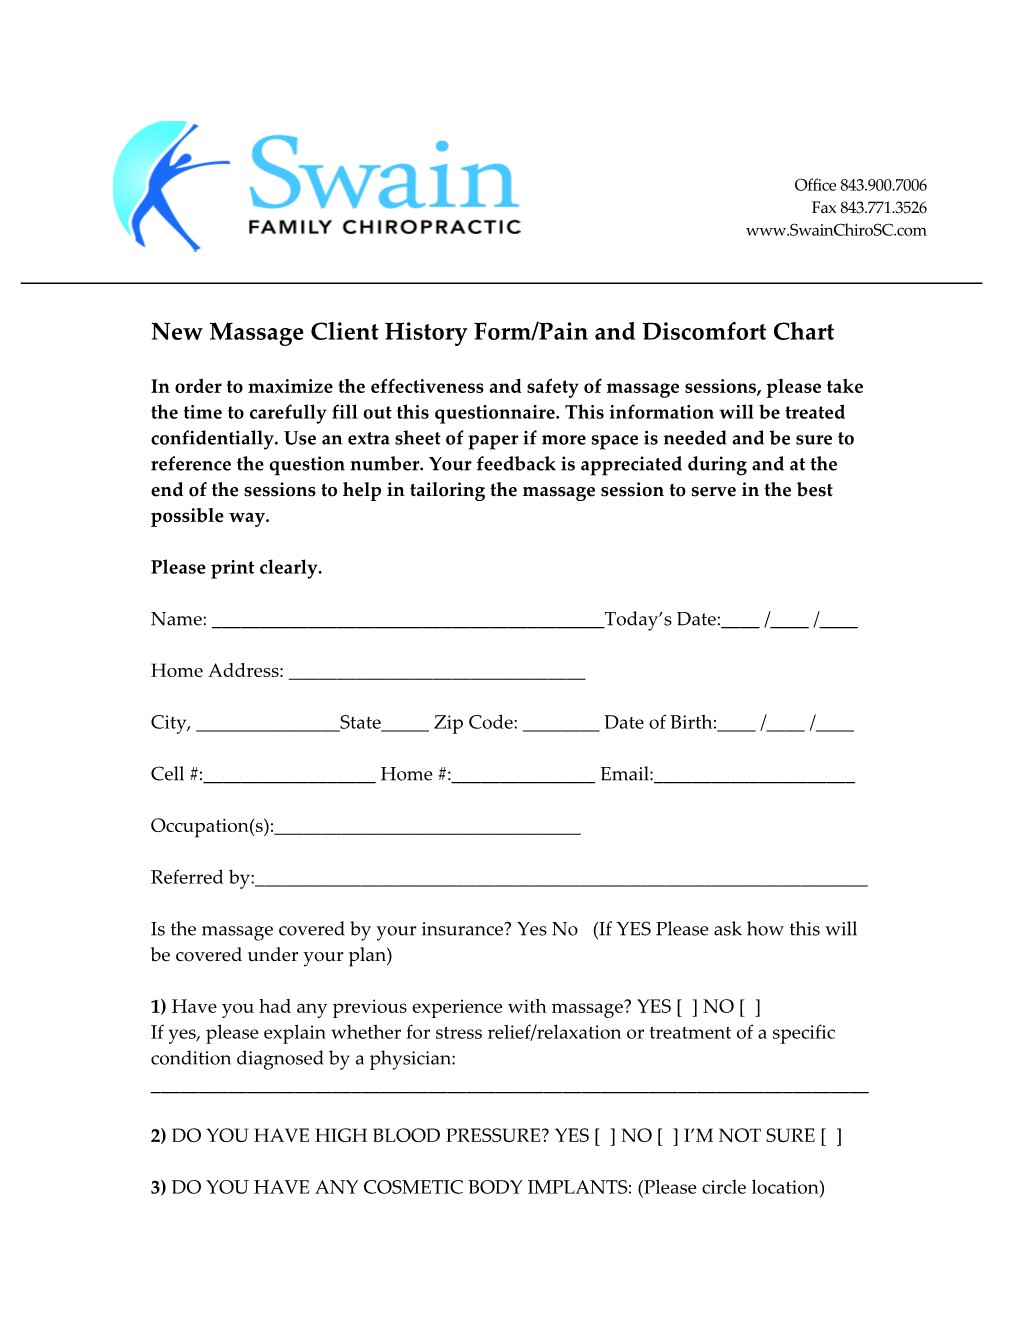 New Massage Client History Form/Pain and Discomfort Chart